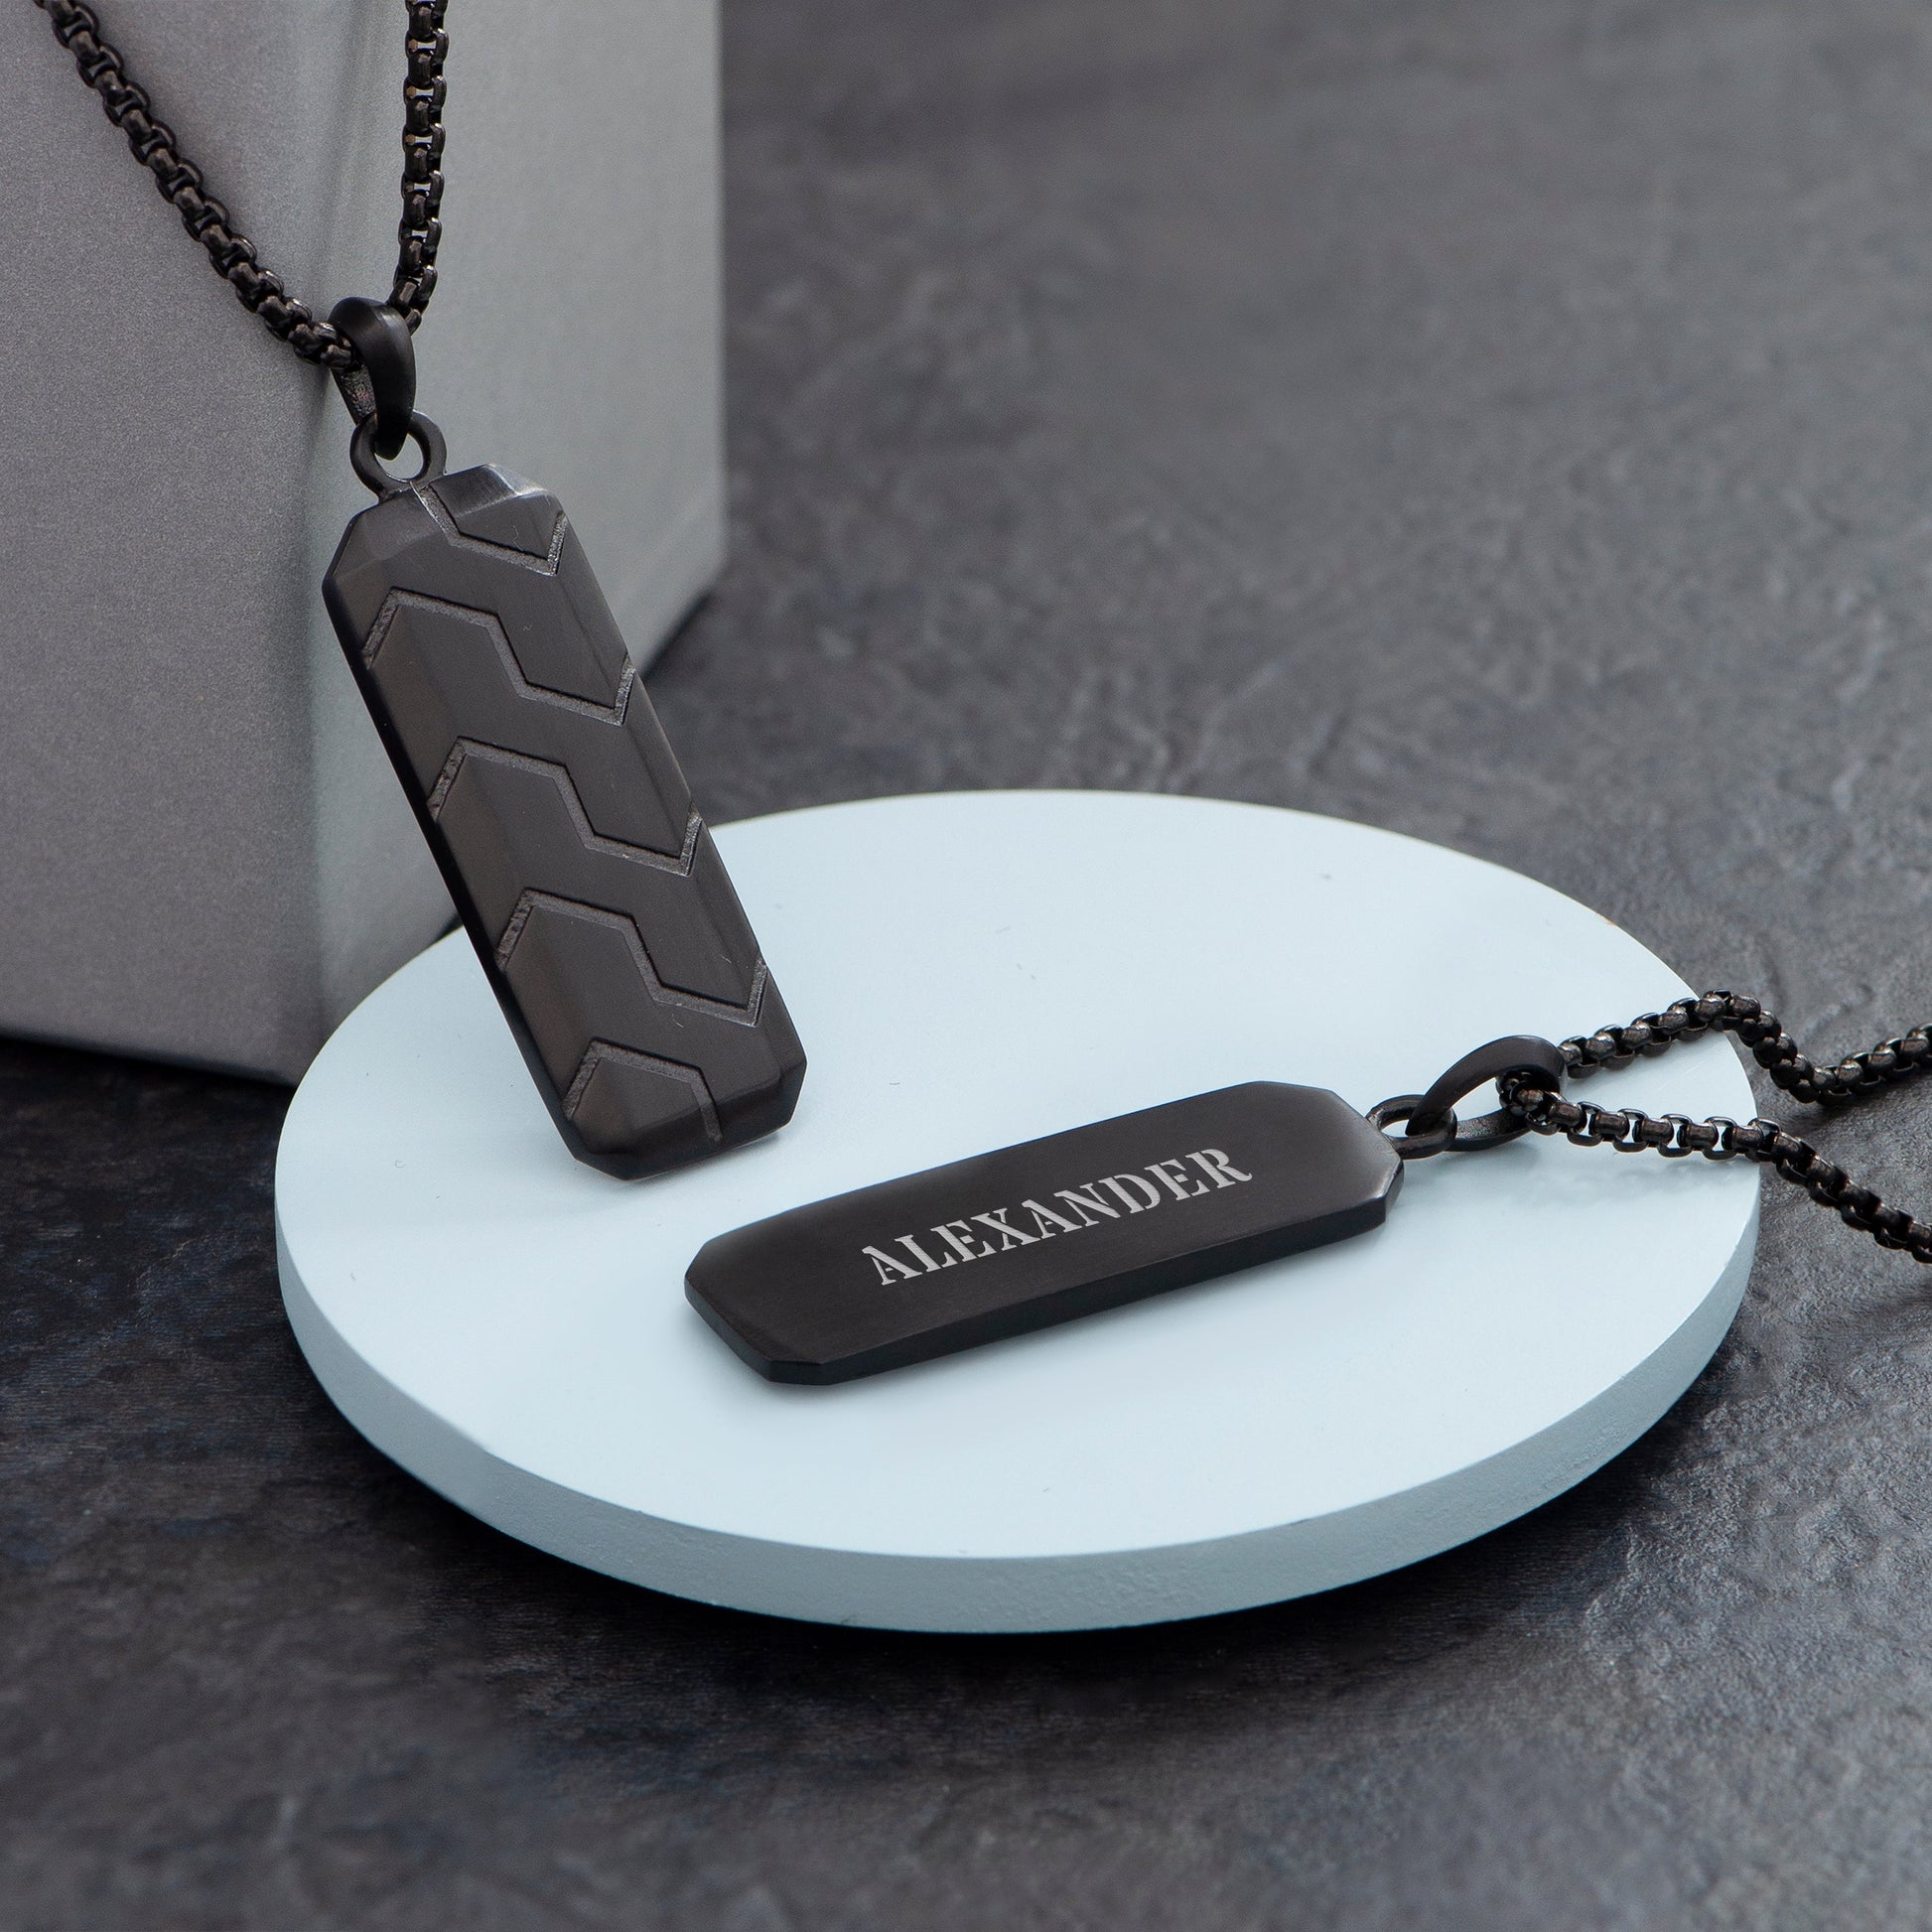 Personalized men's necklaces - Personalized Men's Black Steel Dog Tag Necklace 